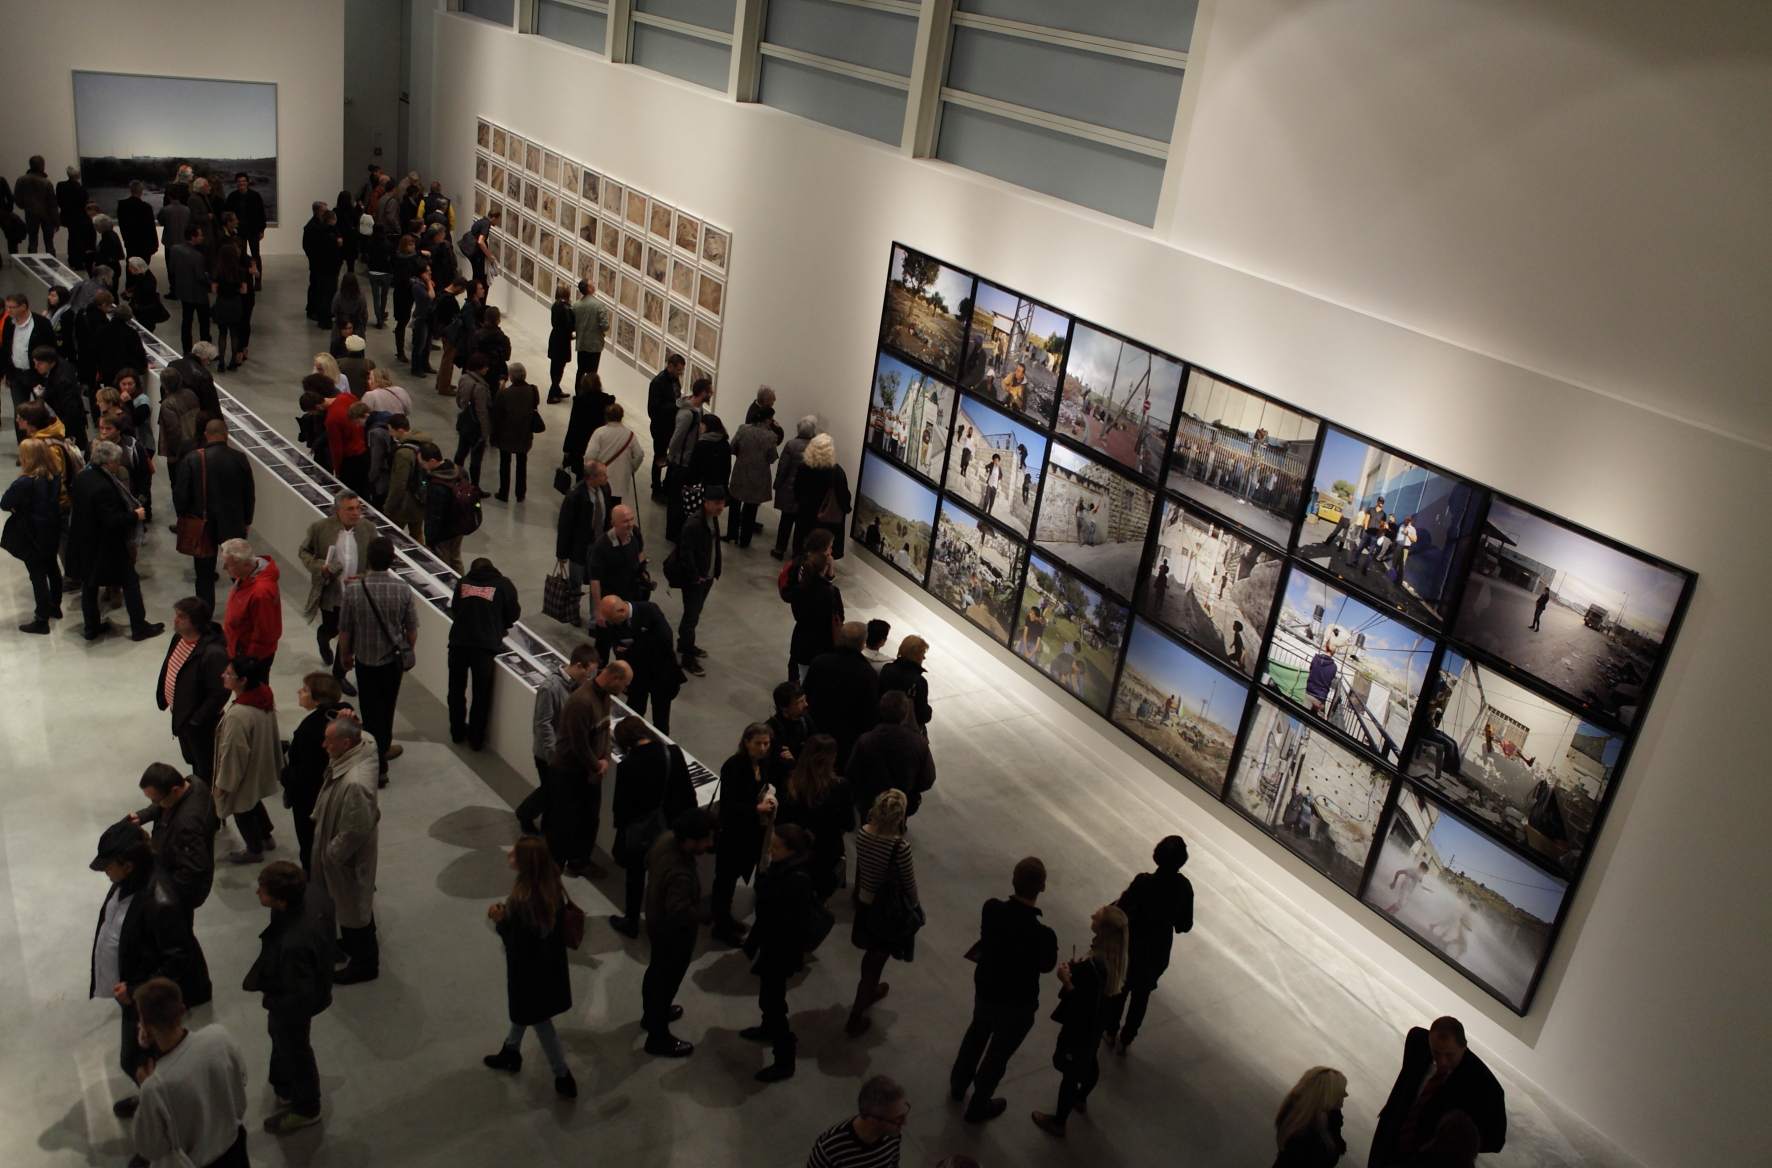 View of the exhibition "This Place" at the Dox Center for Contemporary Art in Prague (photo: Felix Koltermann)